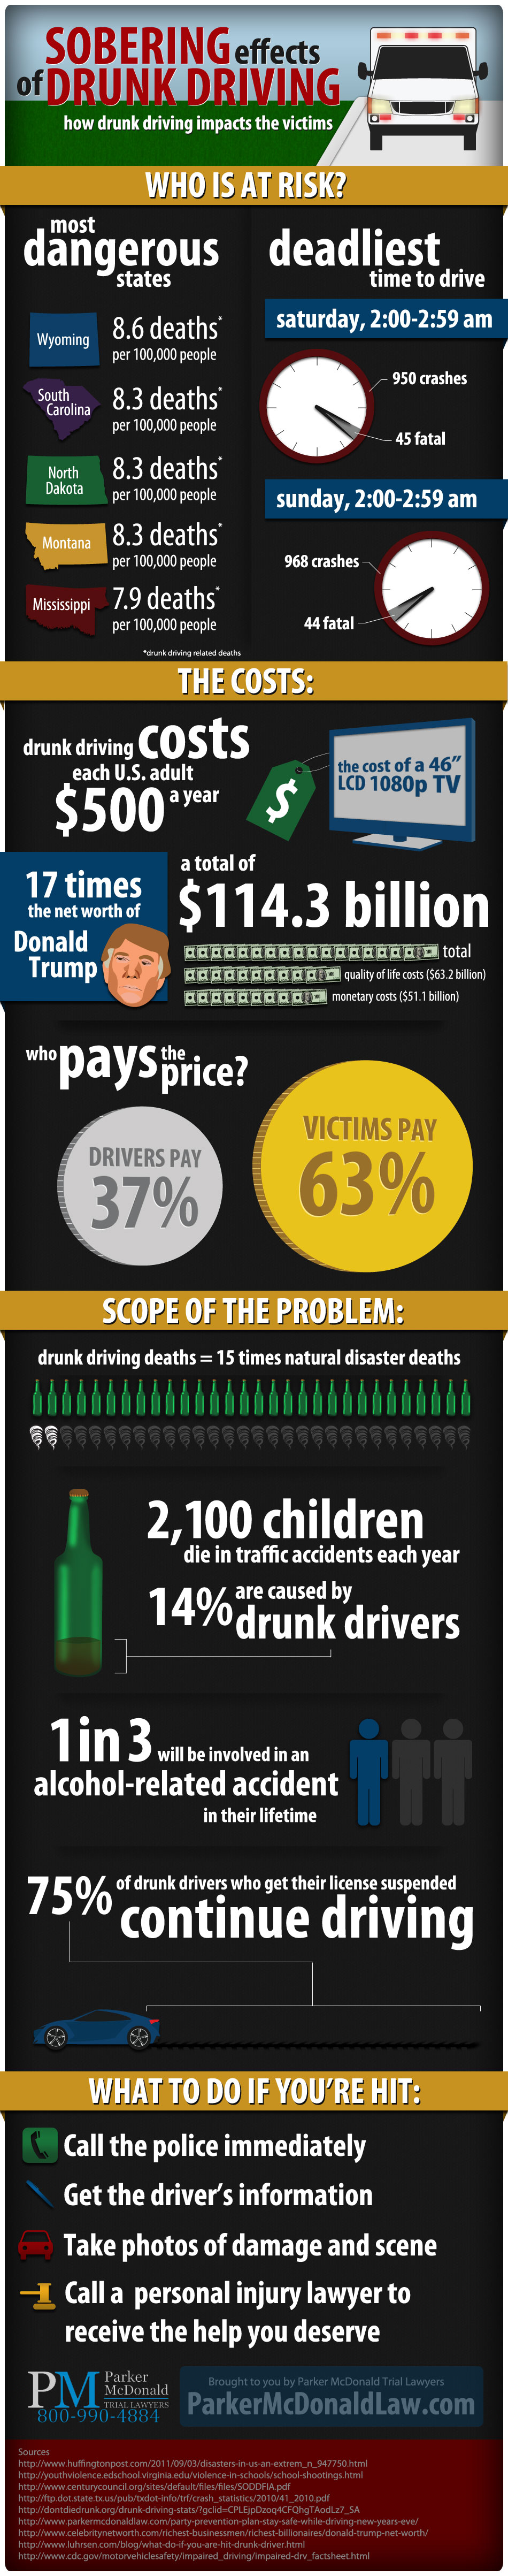 The Sobering Effects Of Drunk Driving [Infographic]